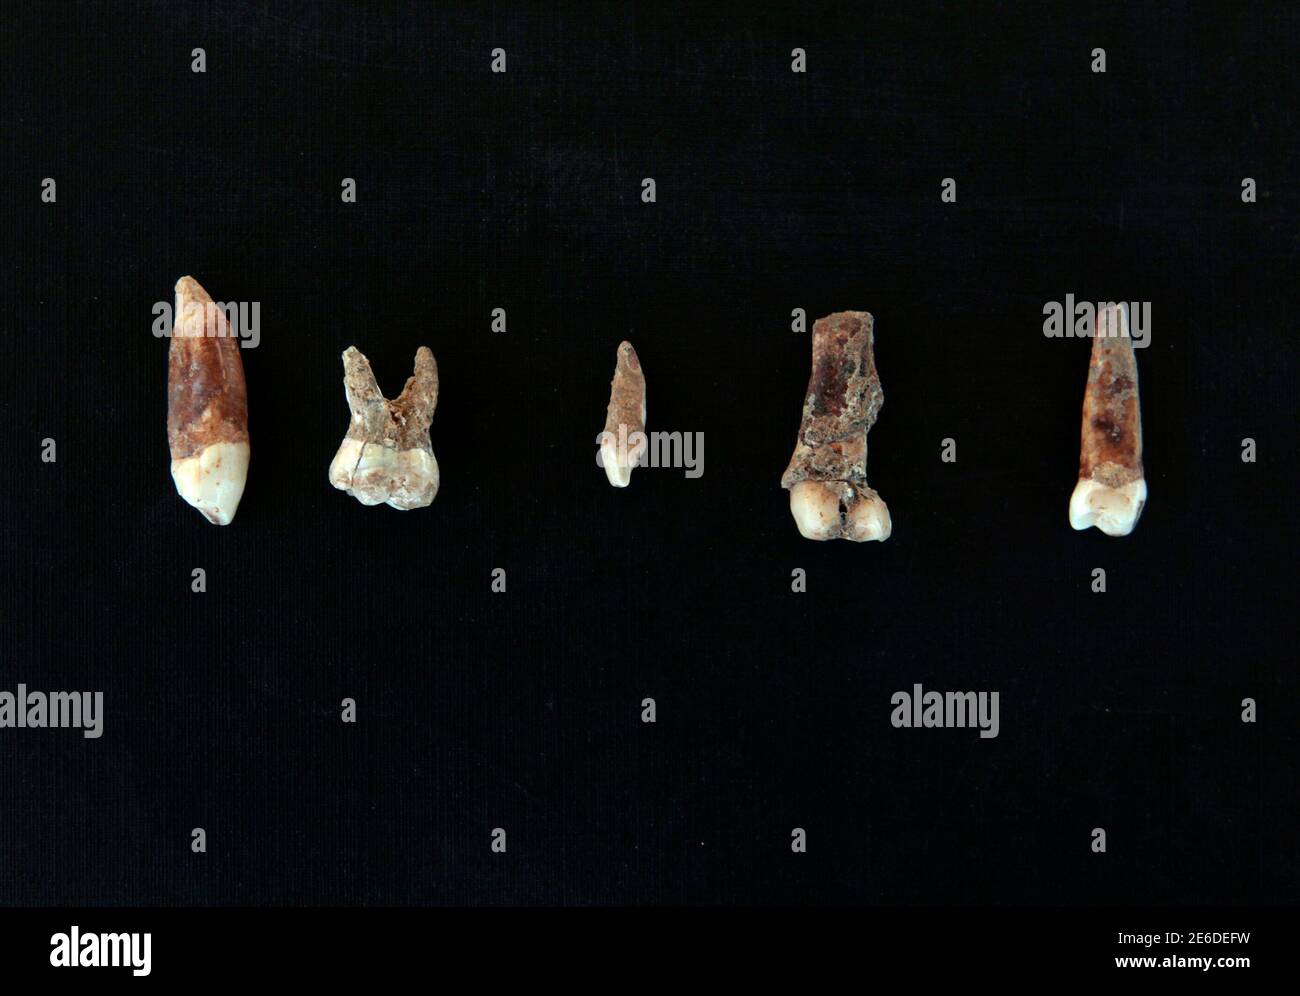 Pre-historic teeth are displayed at Qesem cave, an excavation site near the town of Rosh Ha'ayin, east of Tel Aviv December 27, 2010. A group of international and Israeli researchers have discovered pre-historic artefacts and human remains at the site that may prove the earliest existence of modern man was about 400,000 years ago. If proven, it would change the currently accepted perception that modern man originated on the African continent about 200,000 years ago. REUTERS/Baz Ratner (ISRAEL - Tags: SOCIETY SCI TECH) Stock Photo